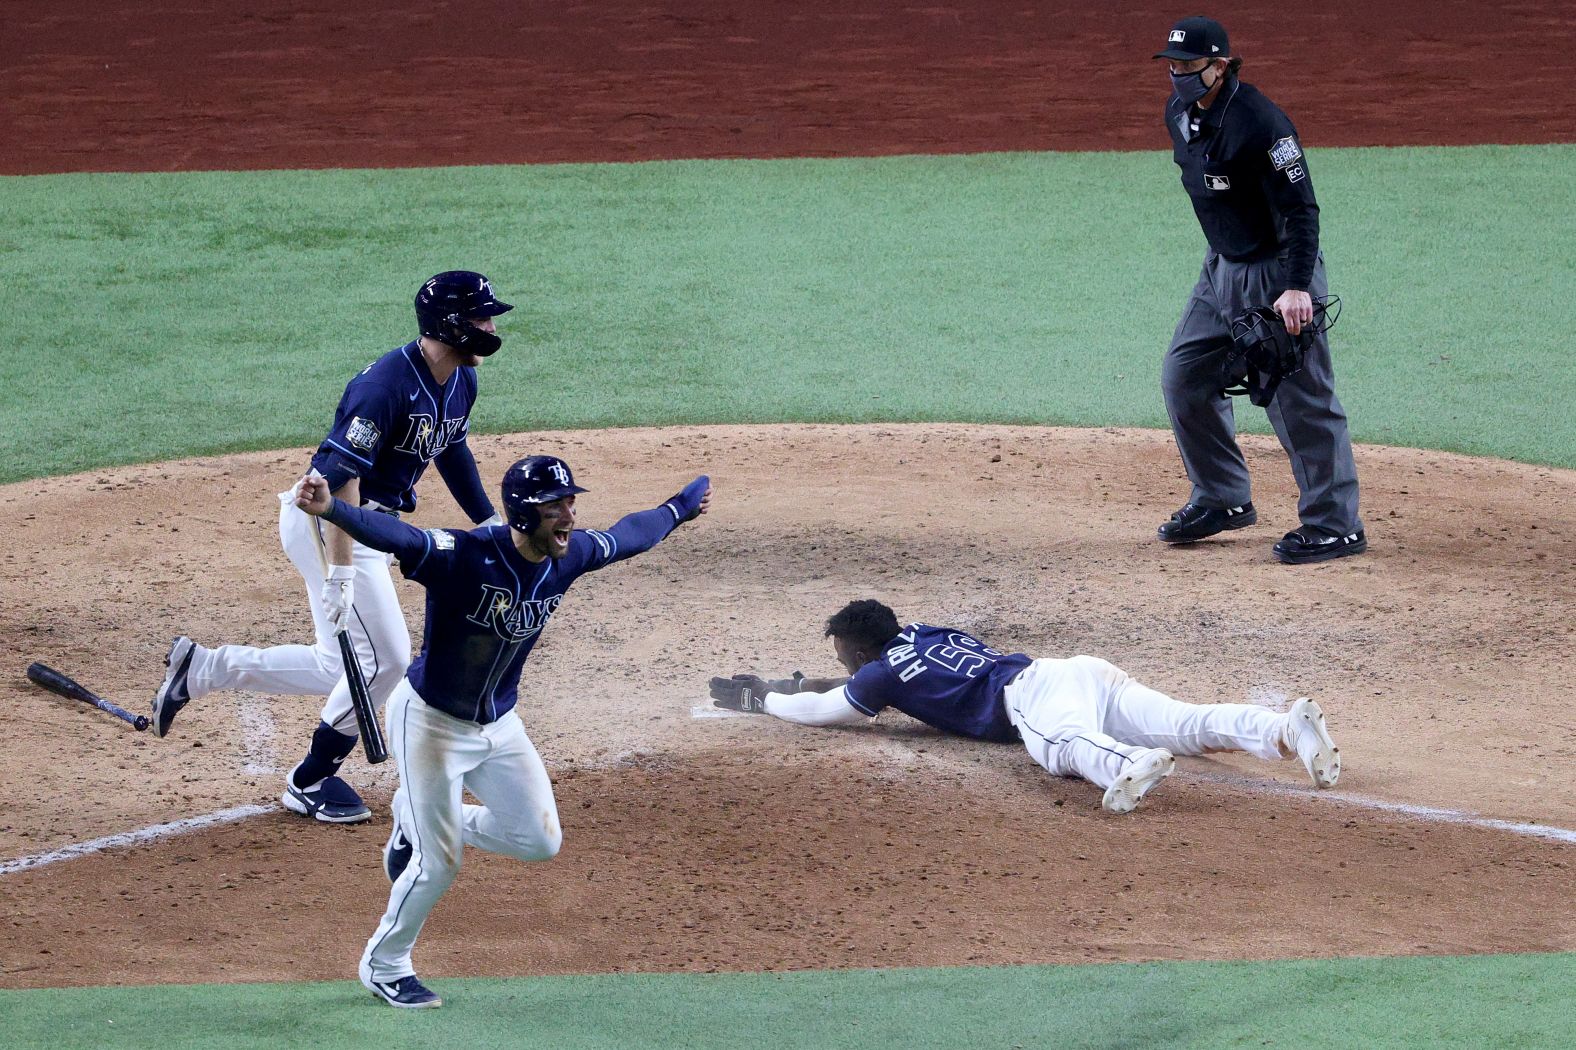 The Rays' Randy Arozarena slides into home plate during the ninth inning to score the winning run in Game 4. 